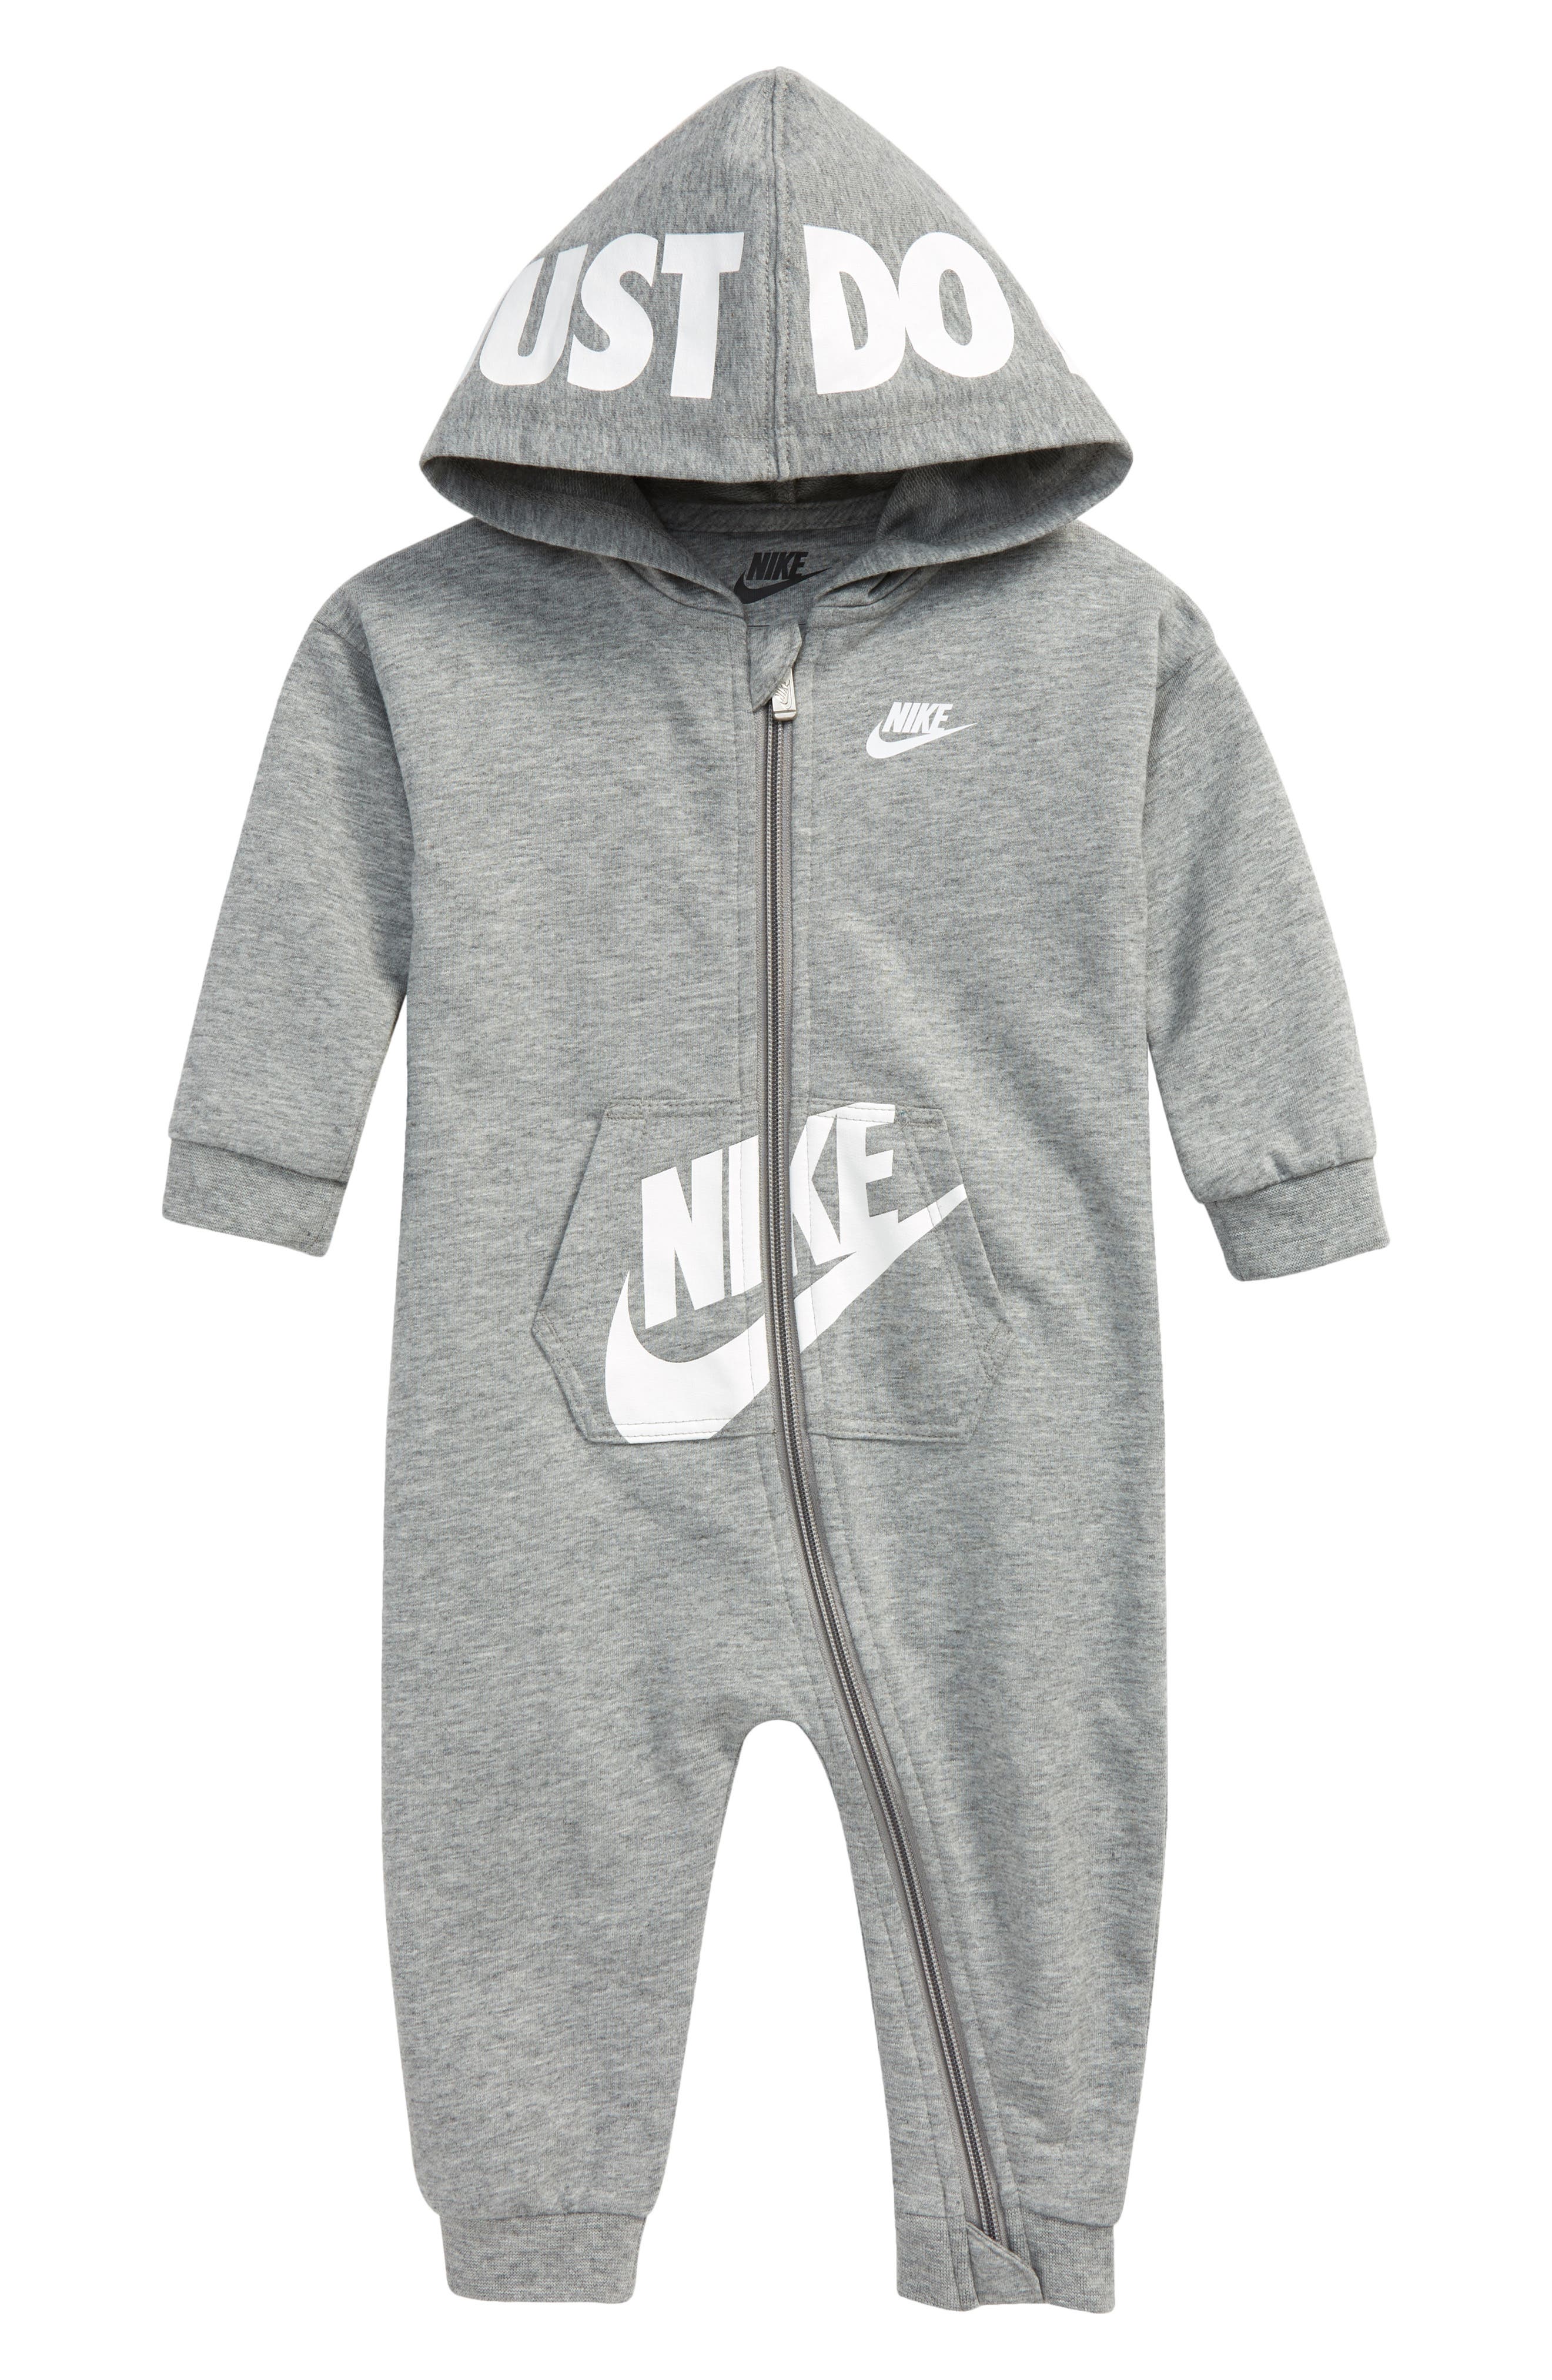 nike baby clothes